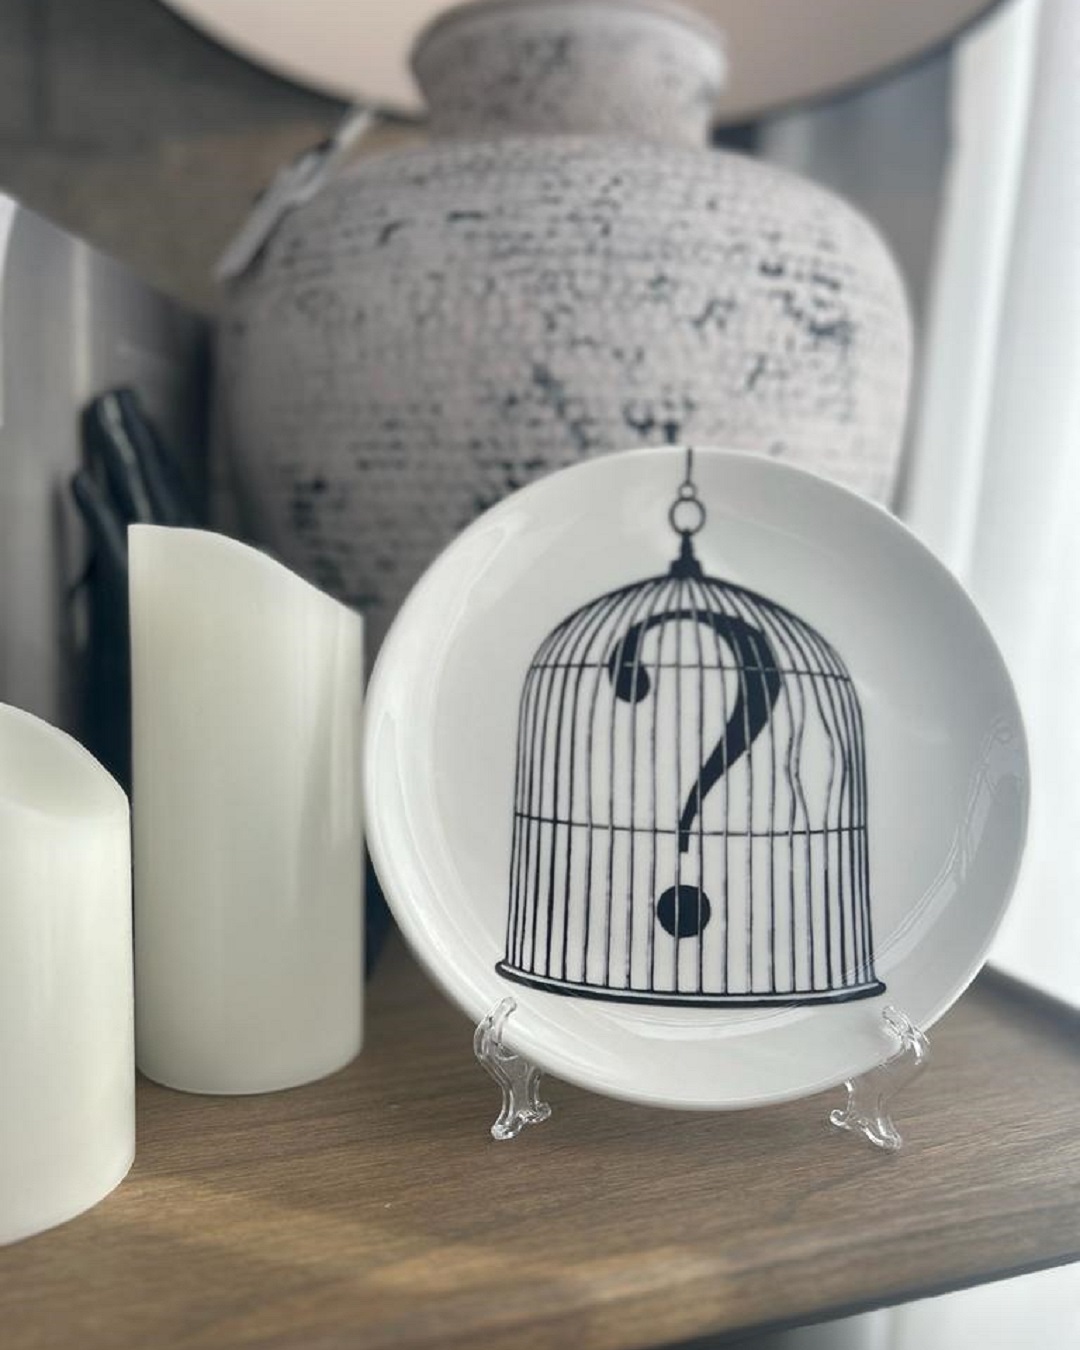 Candles vase and white round plate with bird cage and question mark on it in plate stand